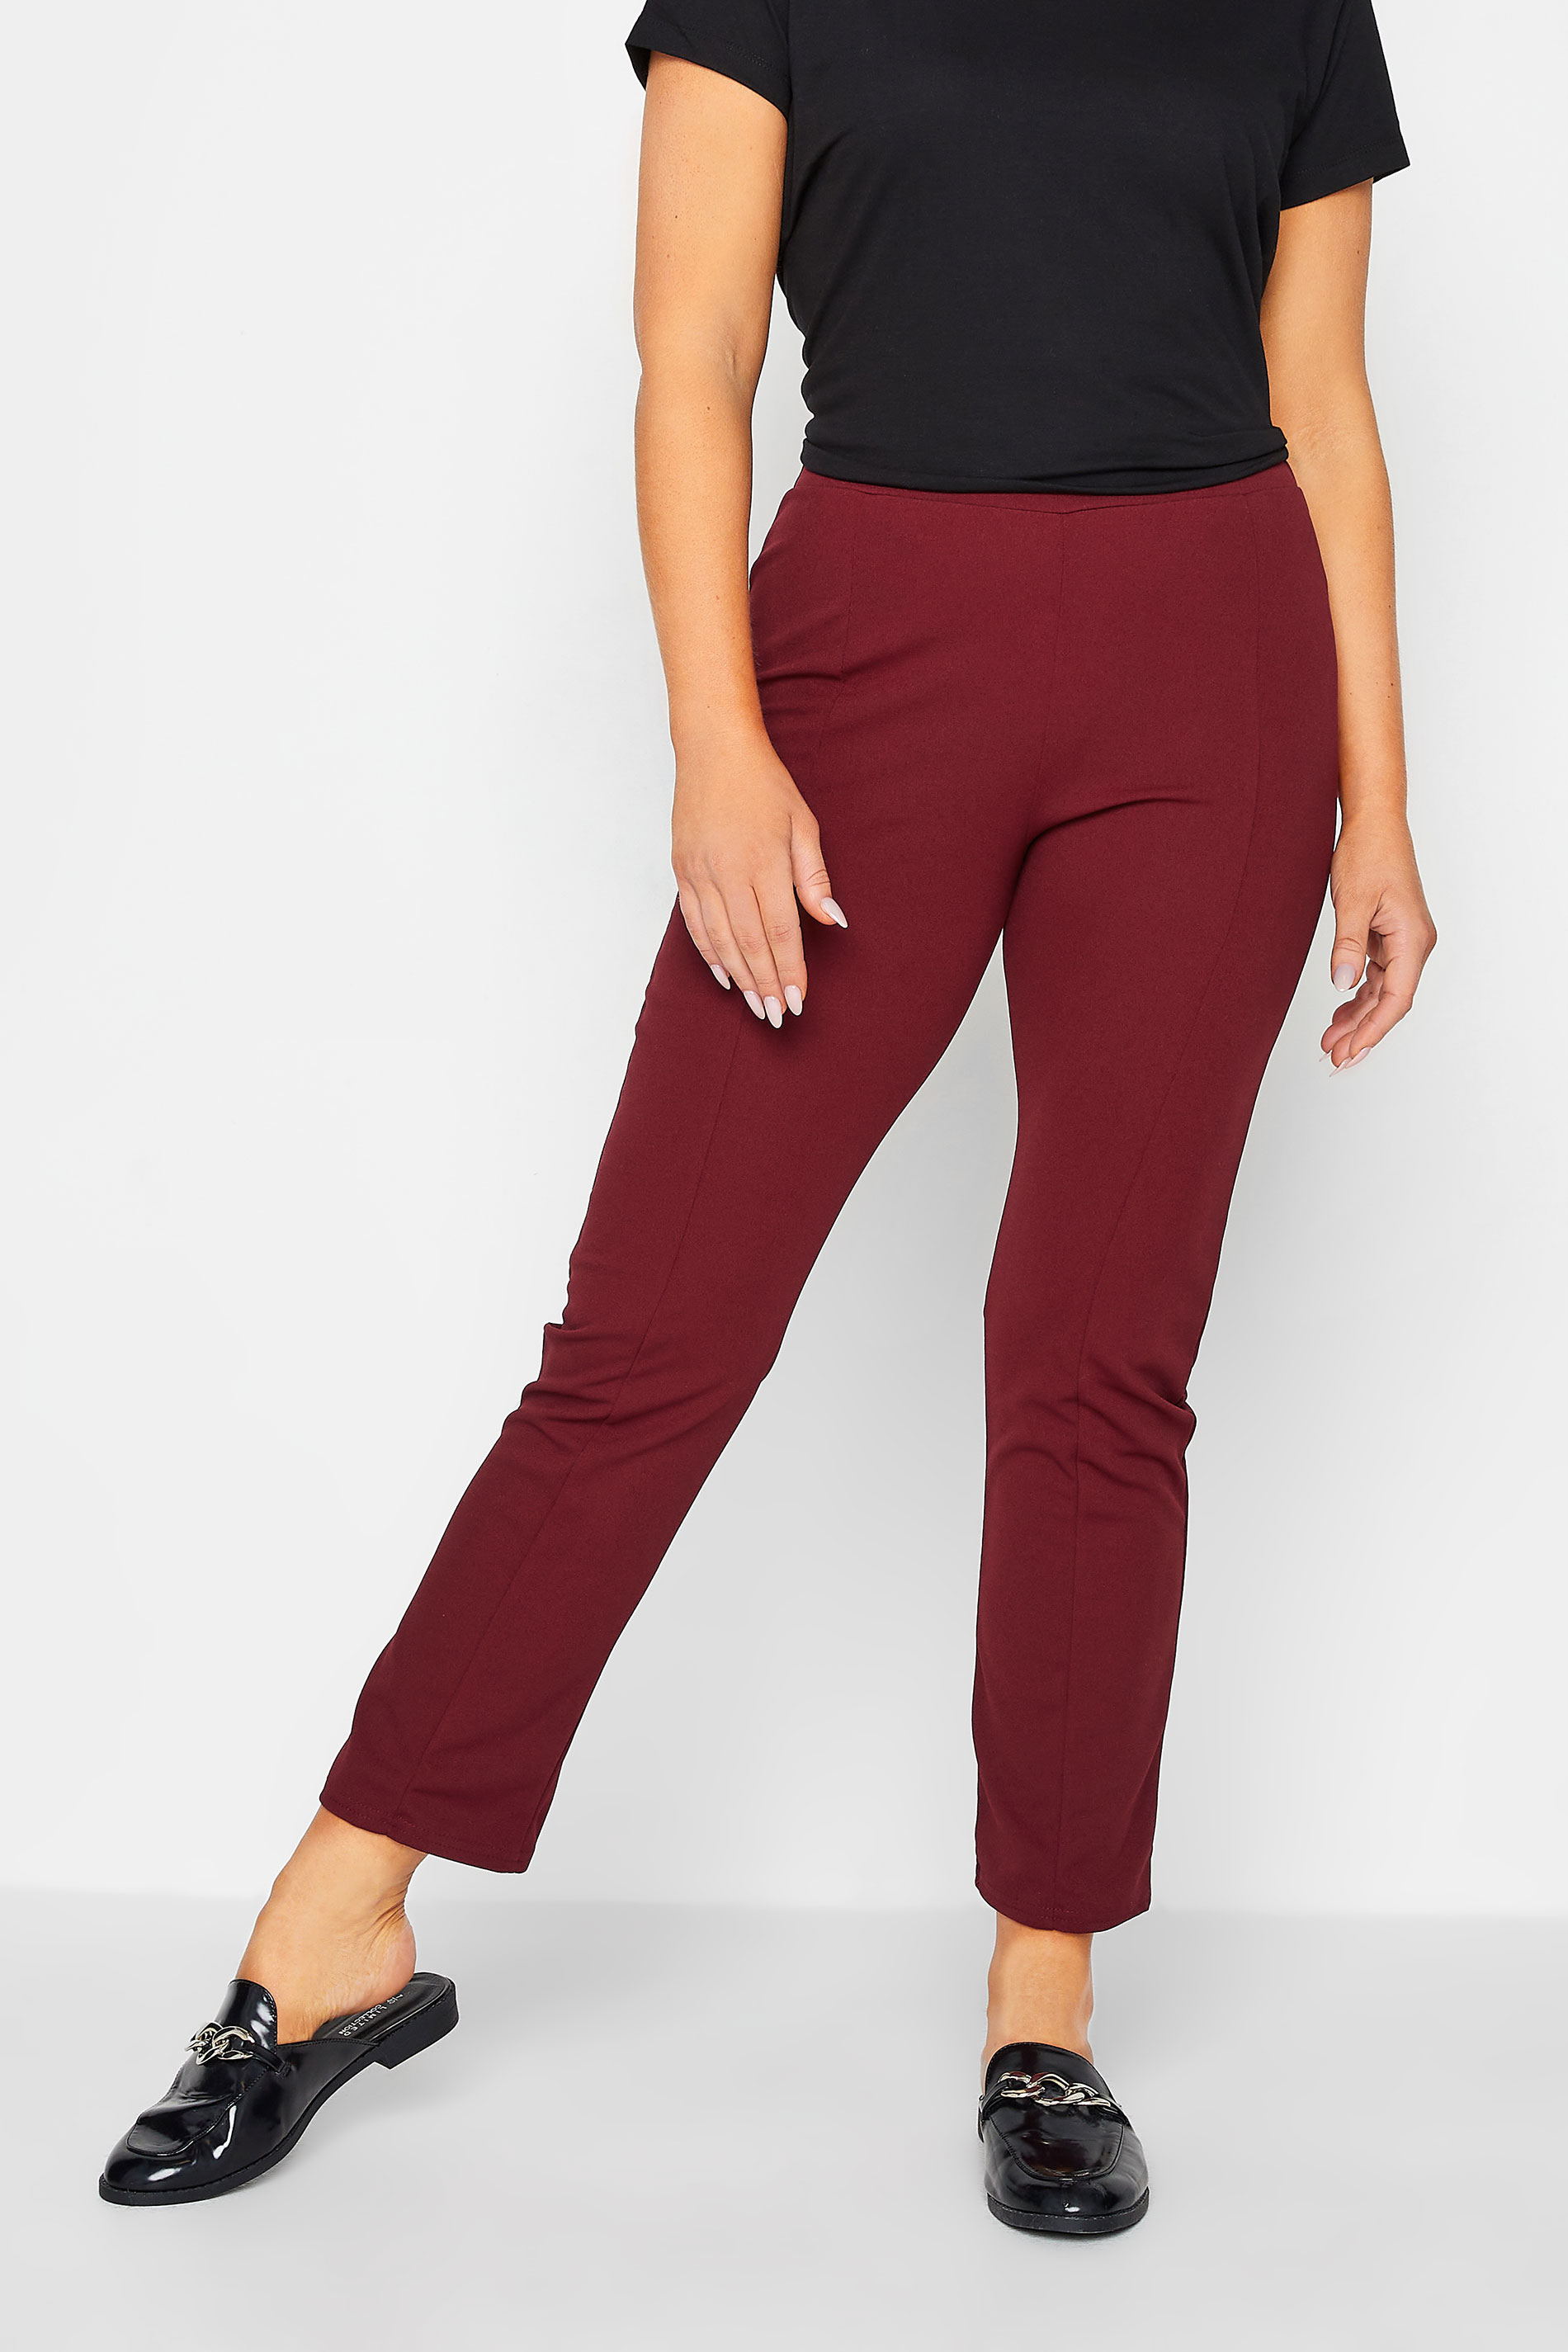 Buy Red Trousers  Pants for Women by Marks  Spencer Online  Ajiocom